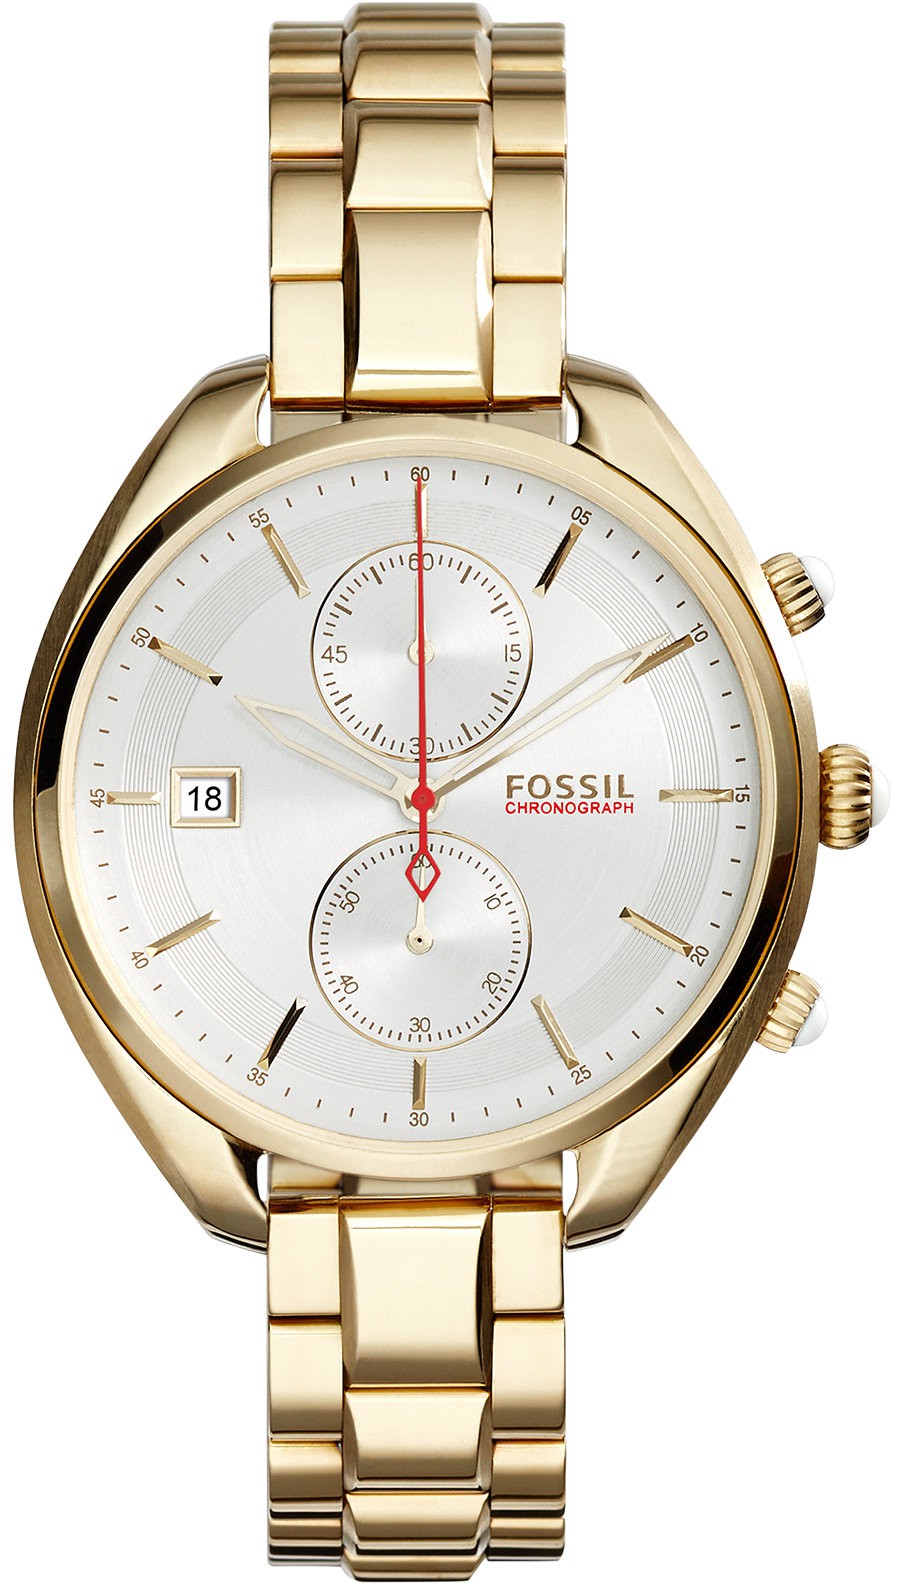 FOSSIL Land Racer ch2976 